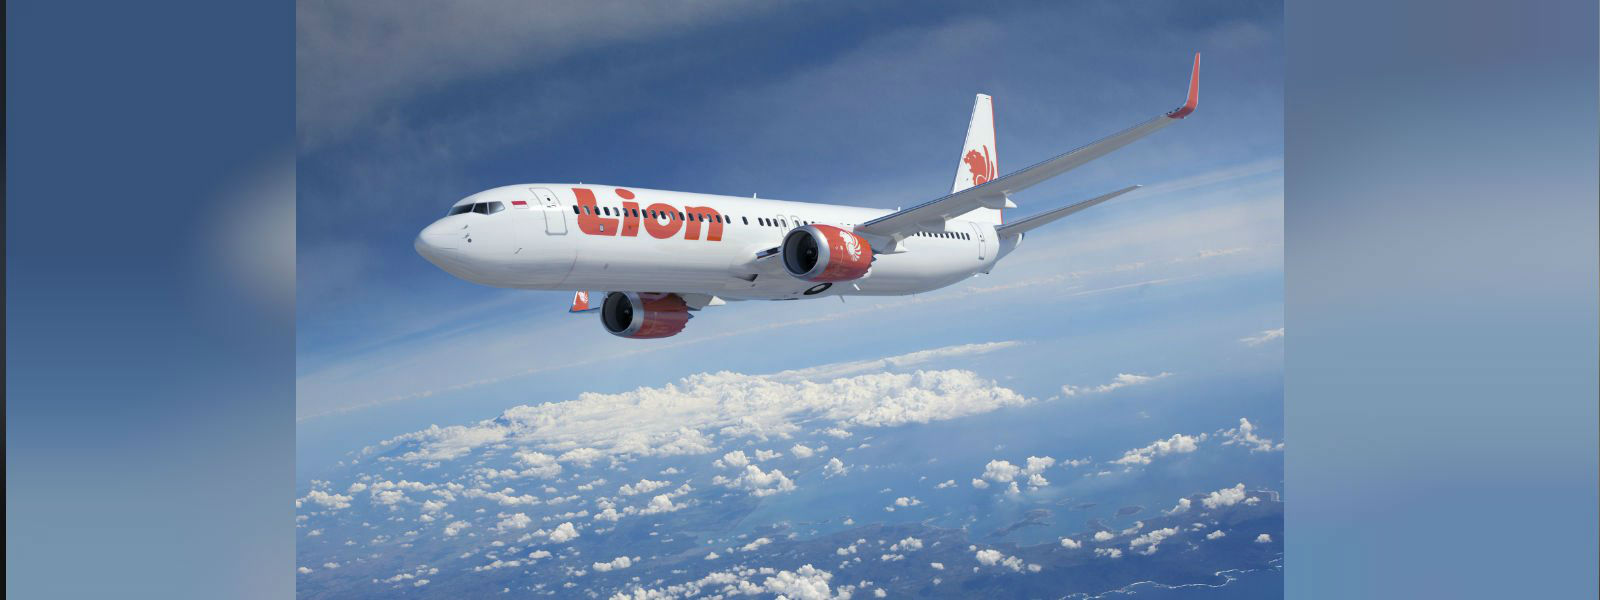 Post mortem of deceased Lion air passengers to be conducted today